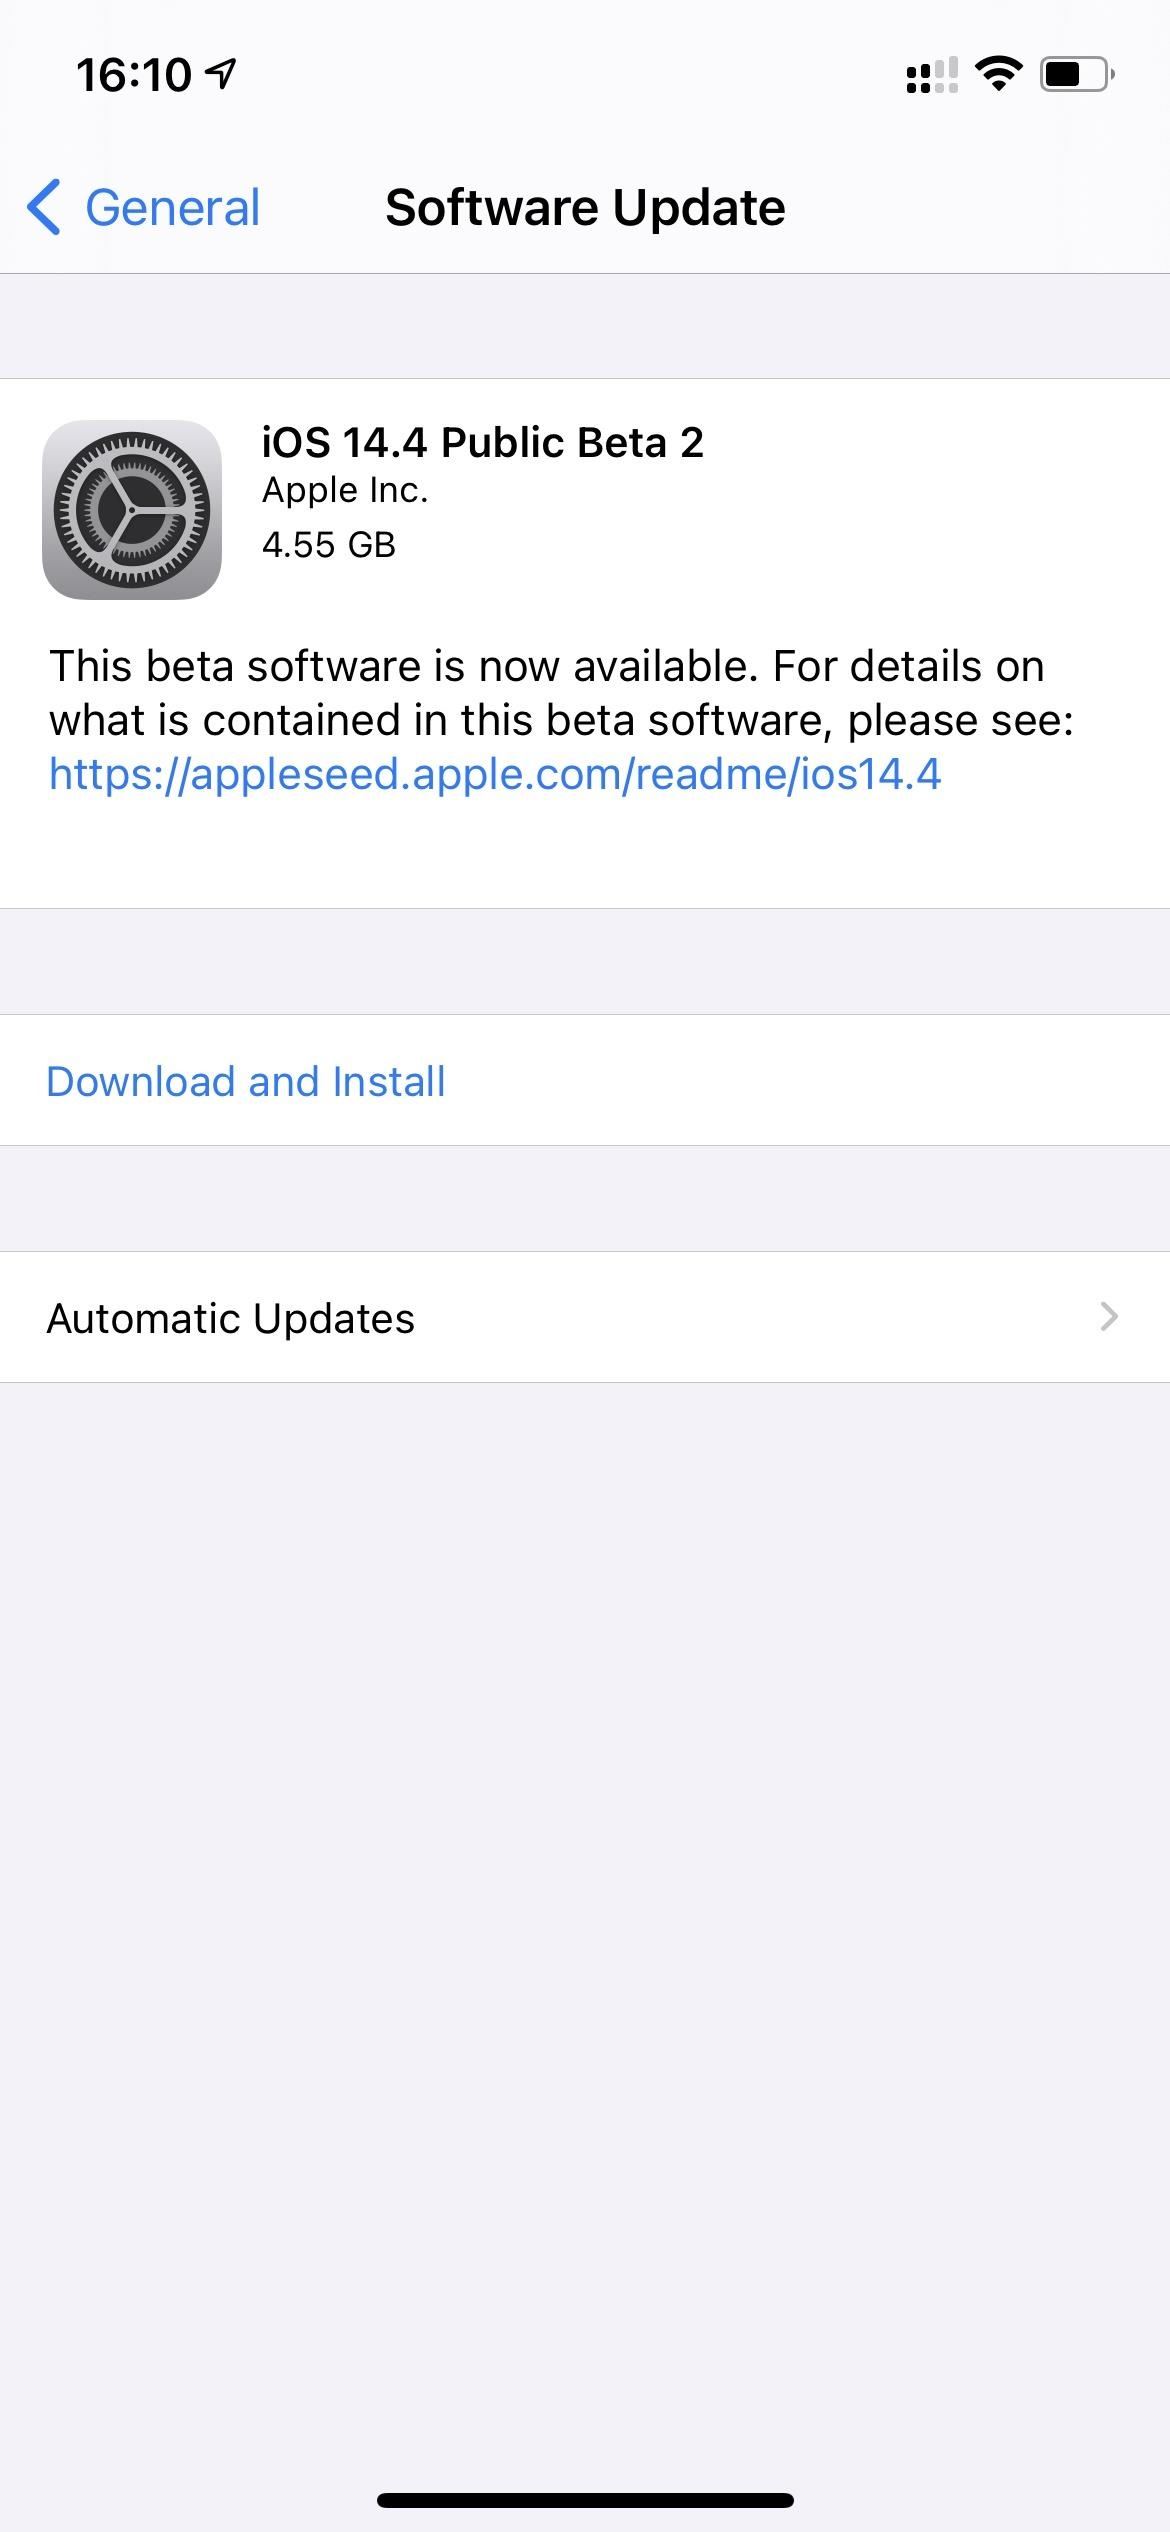 Apple Releases iOS 14.4 Public Beta 2 for Software Testers